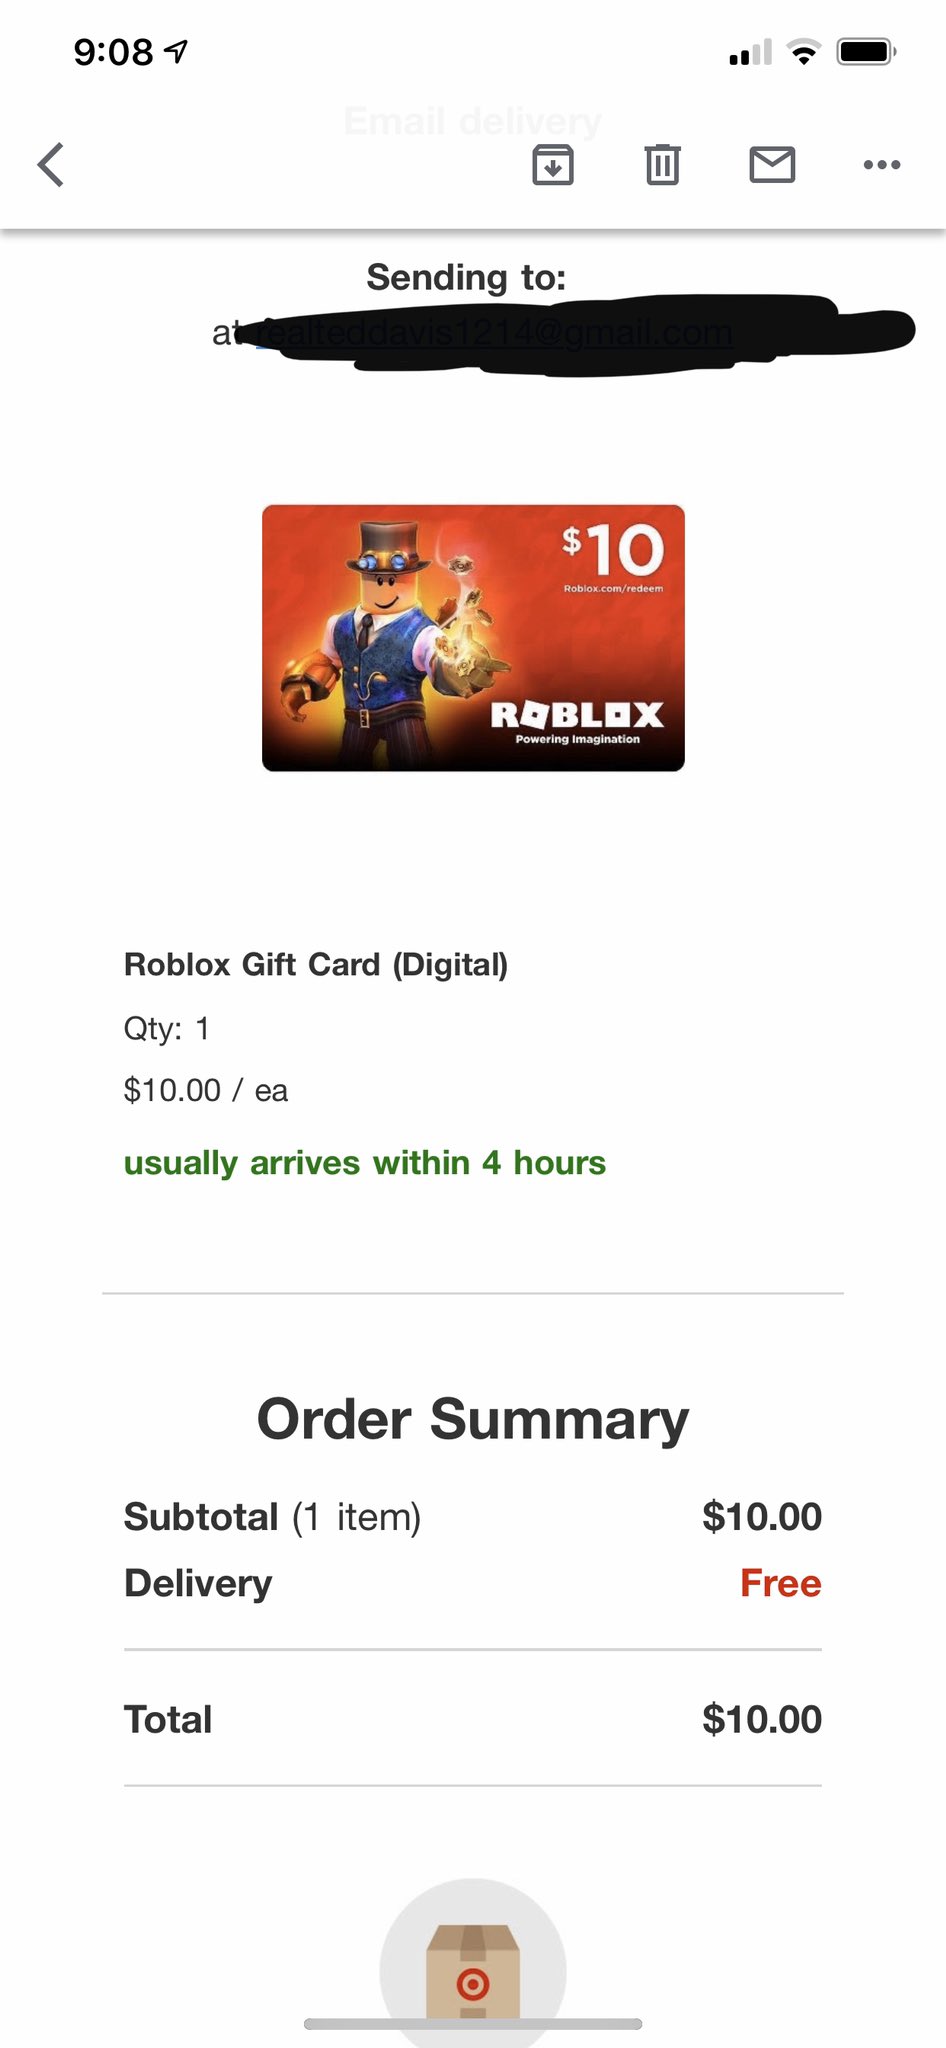 Ted On Twitter Doing A 10 Roblox Gift Card Giveaway I Ll Giveaway A Free 10 Roblox Gift Card To One Person How To Enter 1 Retweet This Post 2 Follow Me - how to unfollow everyone on roblox 2019 robux gift card